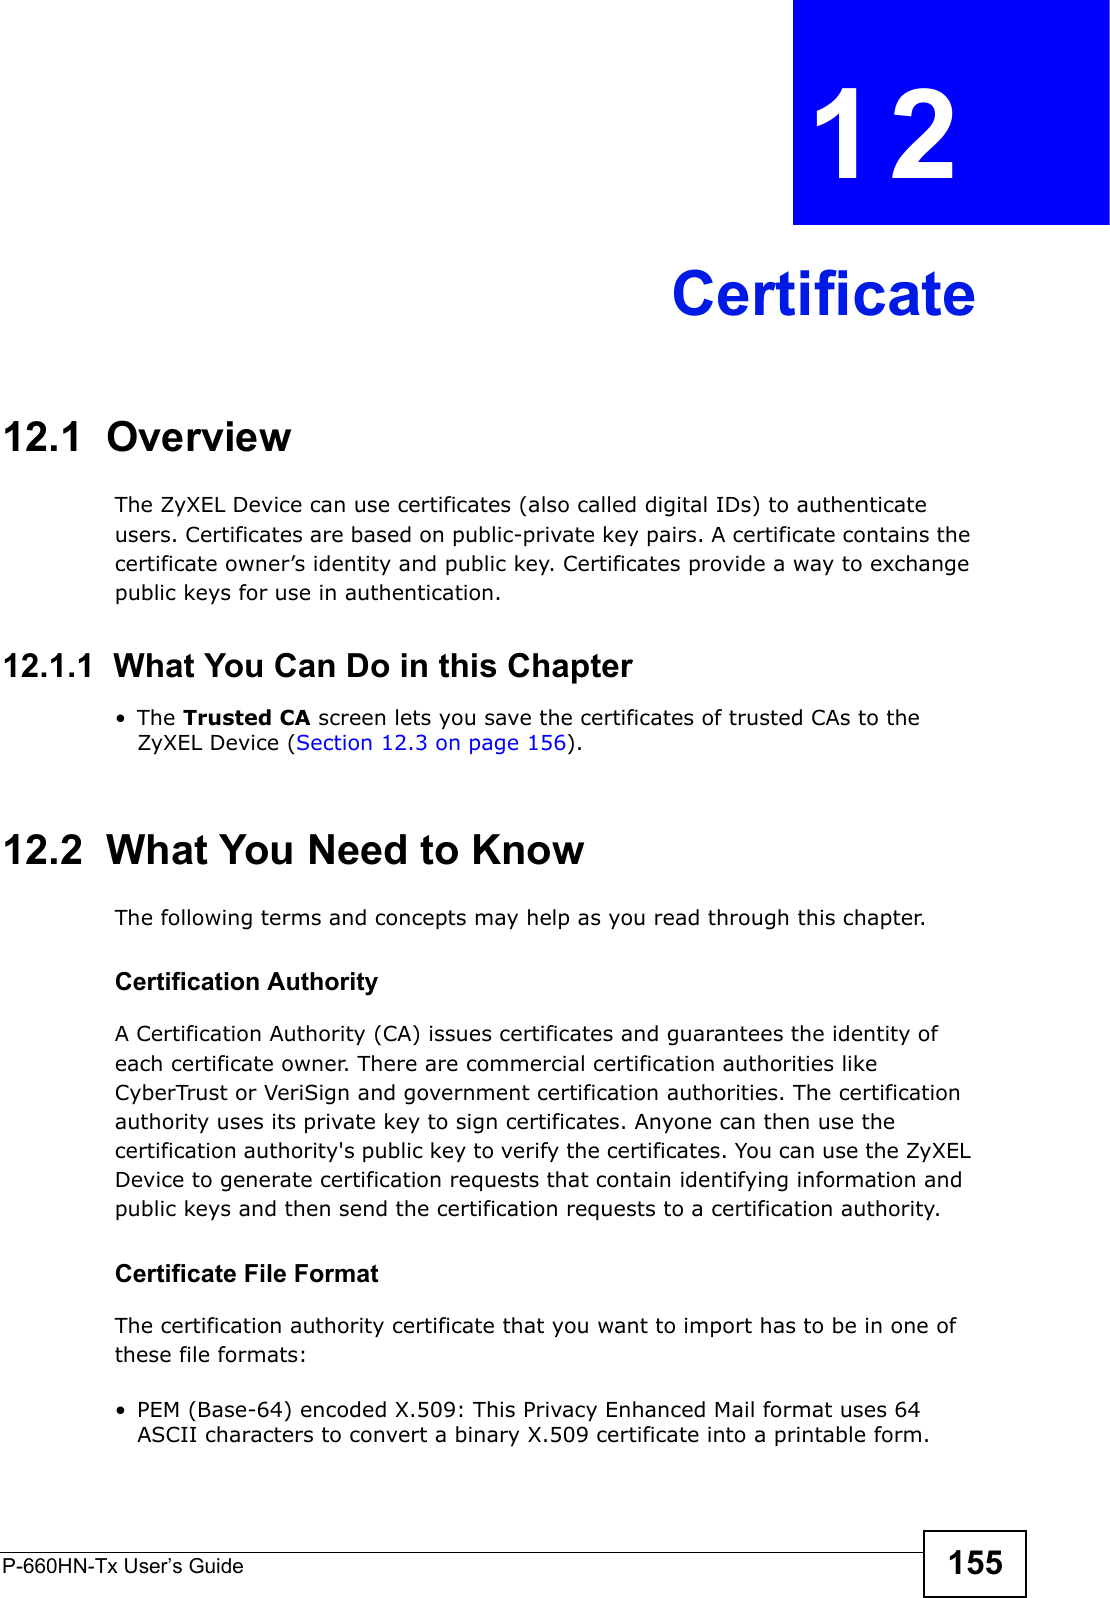 P-660HN-Tx User’s Guide 155CHAPTER  12 Certificate12.1  OverviewThe ZyXEL Device can use certificates (also called digital IDs) to authenticate users. Certificates are based on public-private key pairs. A certificate contains the certificate owner’s identity and public key. Certificates provide a way to exchange public keys for use in authentication. 12.1.1  What You Can Do in this Chapter•The Trusted CA screen lets you save the certificates of trusted CAs to the ZyXEL Device (Section 12.3 on page 156).12.2  What You Need to KnowThe following terms and concepts may help as you read through this chapter.Certification Authority A Certification Authority (CA) issues certificates and guarantees the identity of each certificate owner. There are commercial certification authorities like CyberTrust or VeriSign and government certification authorities. The certification authority uses its private key to sign certificates. Anyone can then use the certification authority&apos;s public key to verify the certificates. You can use the ZyXEL Device to generate certification requests that contain identifying information and public keys and then send the certification requests to a certification authority.Certificate File FormatThe certification authority certificate that you want to import has to be in one of these file formats:• PEM (Base-64) encoded X.509: This Privacy Enhanced Mail format uses 64 ASCII characters to convert a binary X.509 certificate into a printable form.